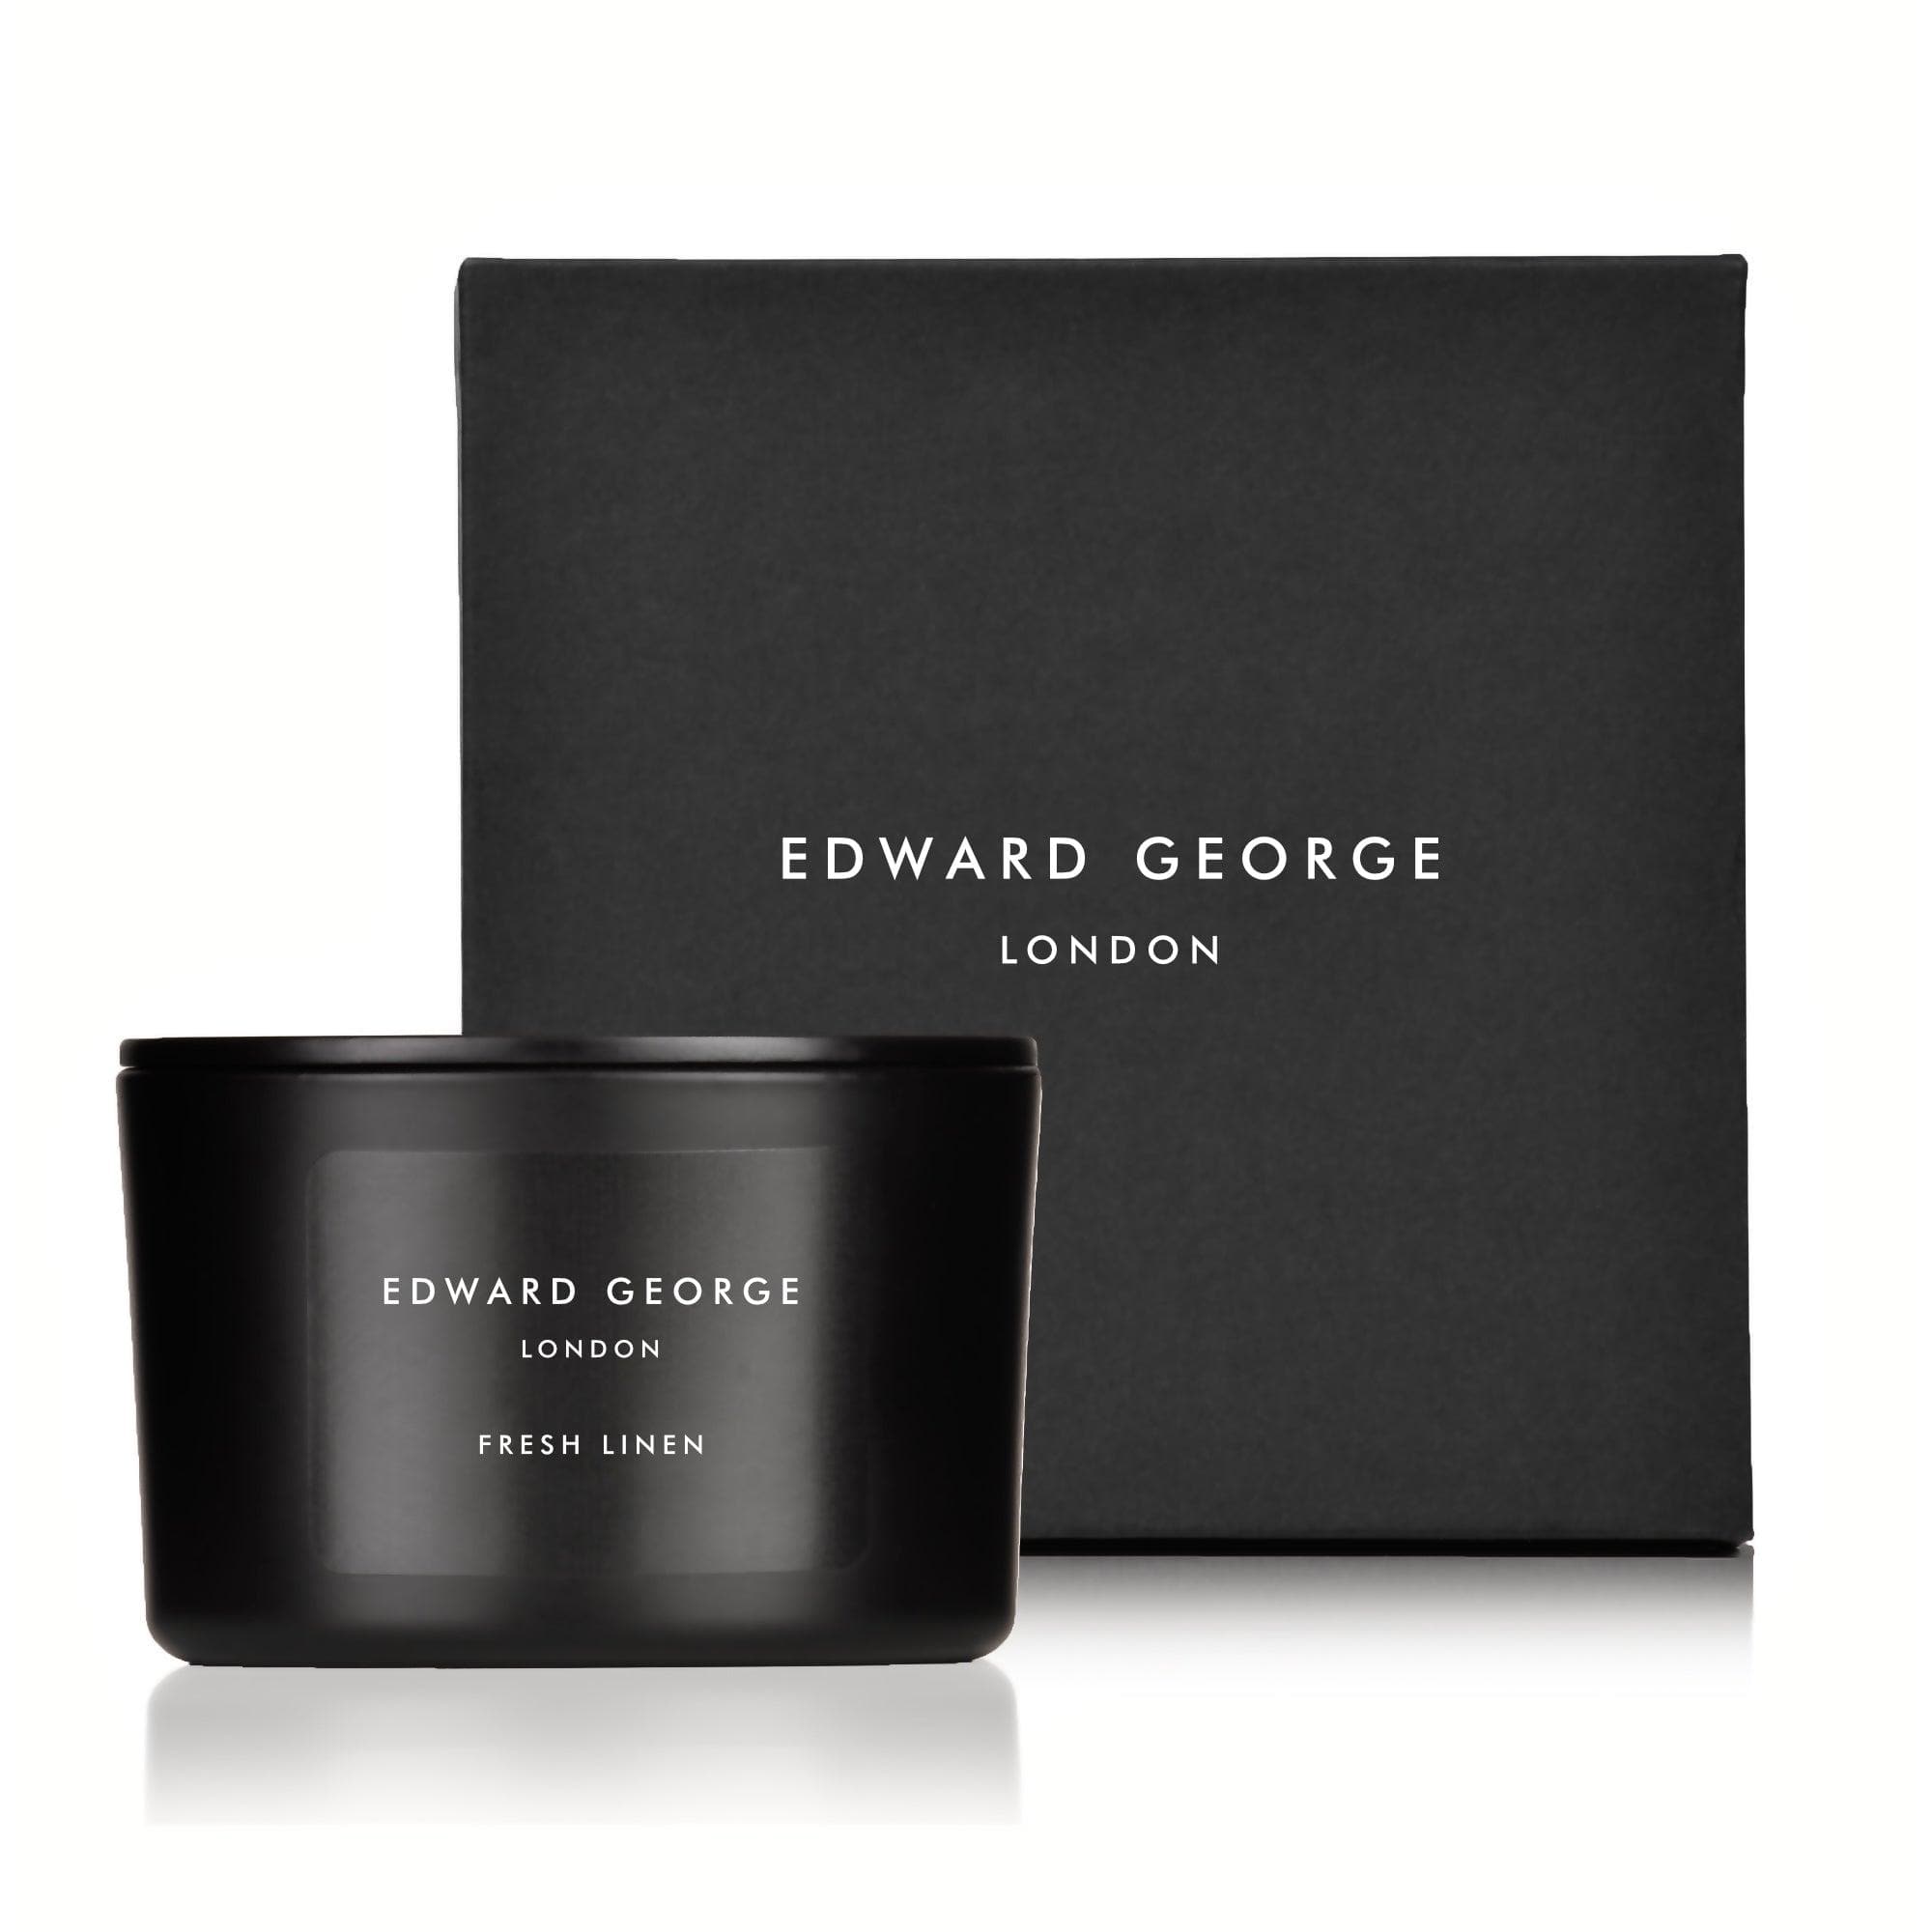 candles home fragrance decor room living room bedroom bathroom hallway kitchen study dinning edward george london luxury gift ritual scent set lid zinc alloy black wax beeswax mineral coconut parafin best black wax scented candle women men small